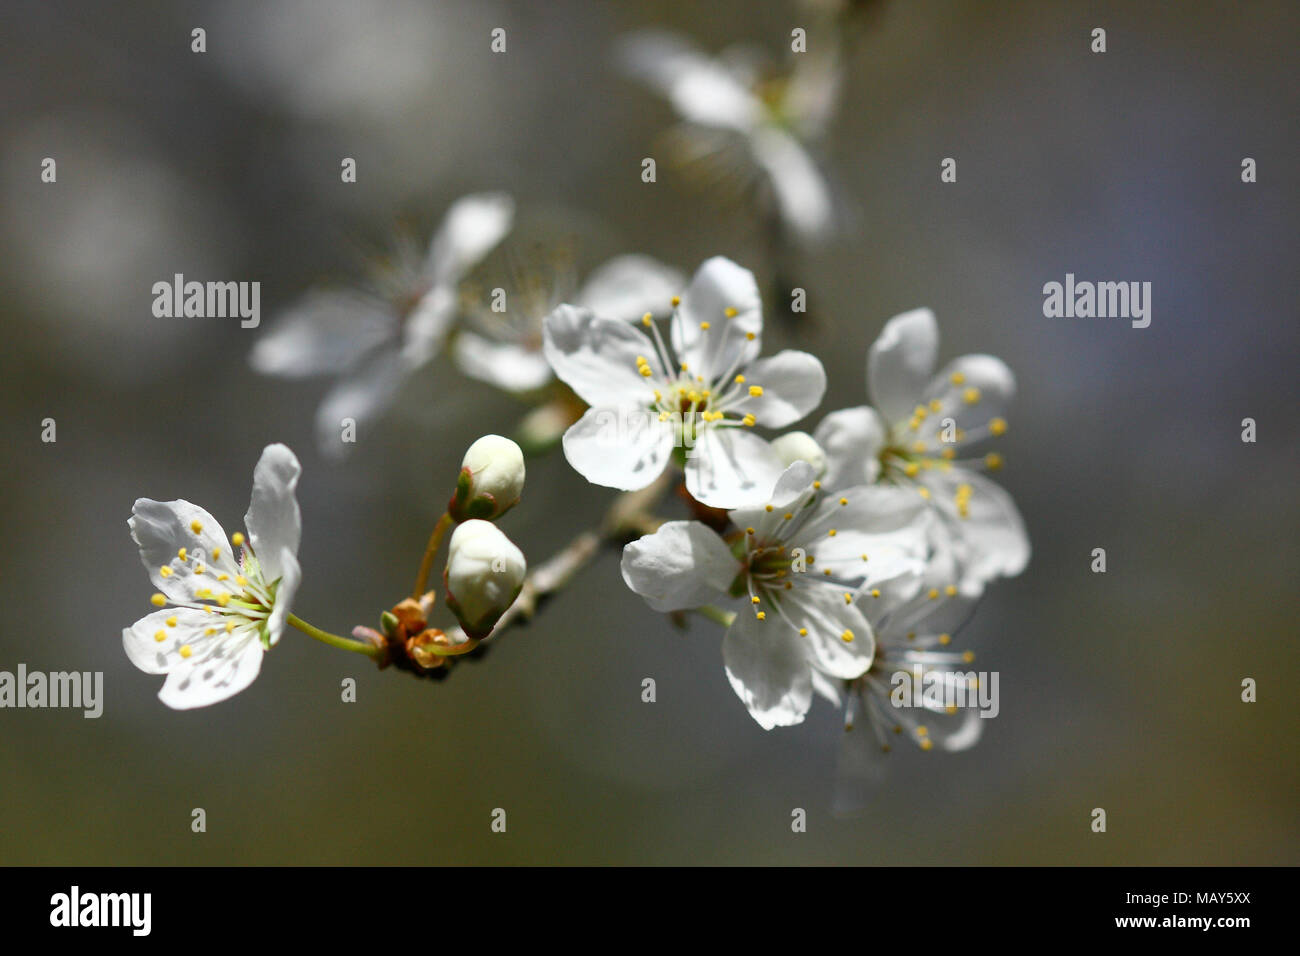 Leeds, UK. 5th April 2018. UK Weather: A warm sunny day at Golden Acre Park, Leeds, West Yorkshire. The blossom was just beginning to come out. Credit: Victoria Gardner/Alamy Live News Stock Photo